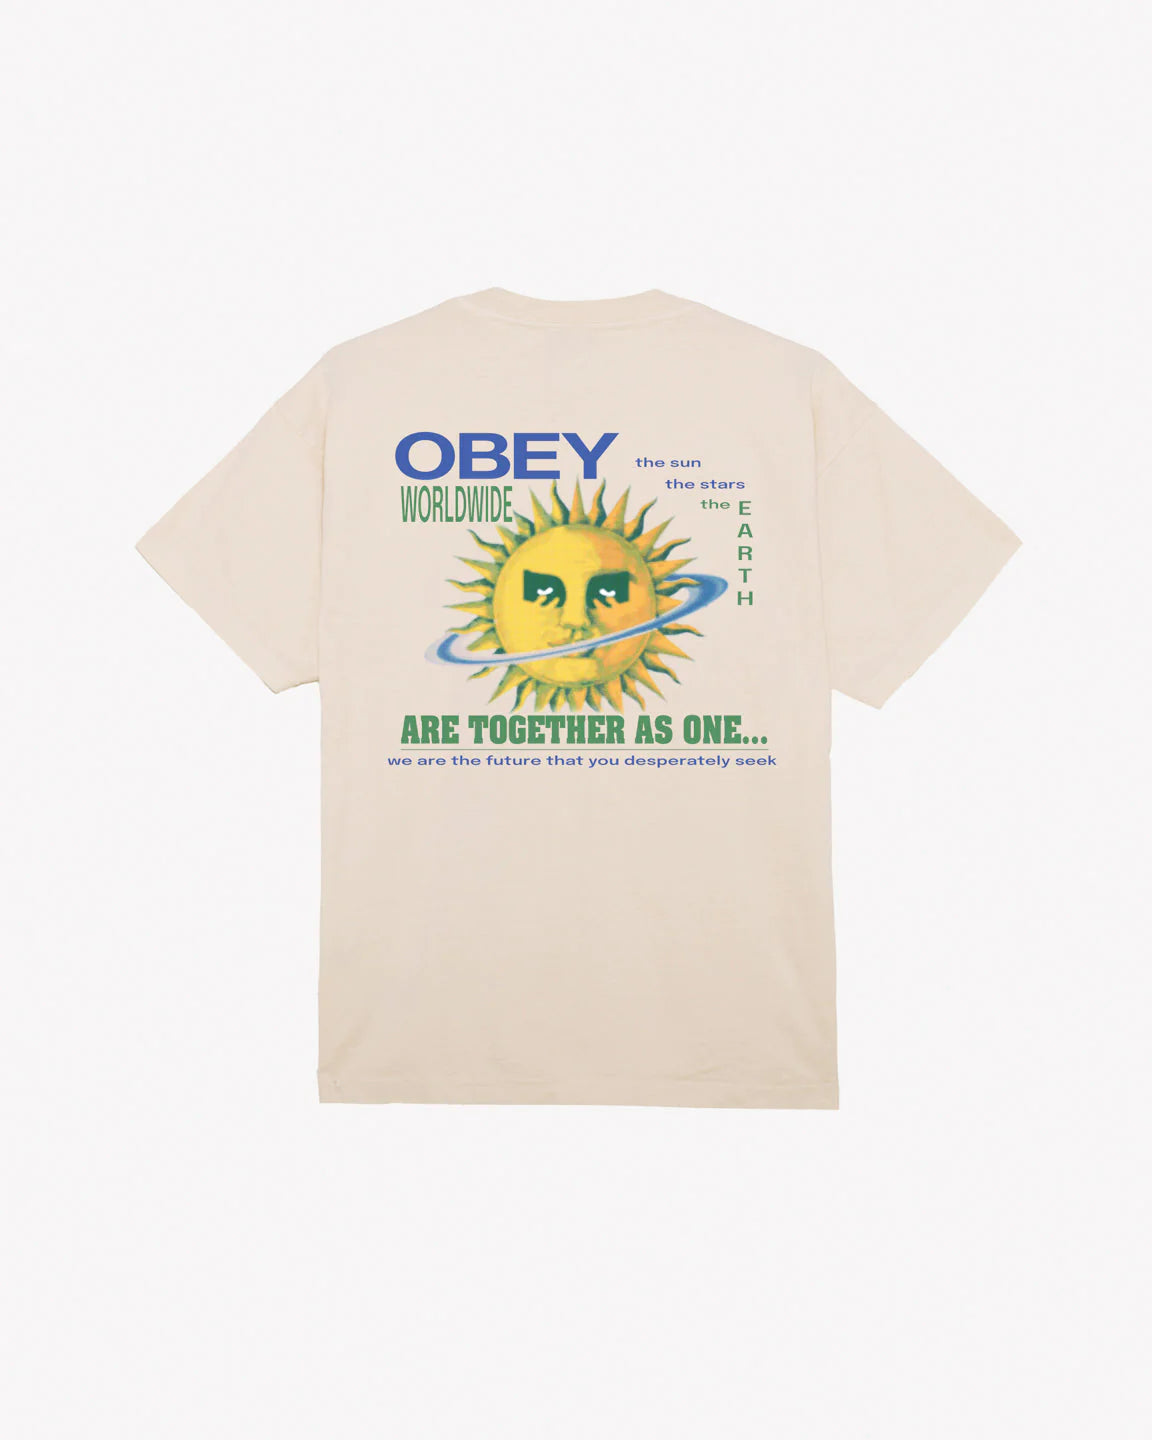 Obey Together as one (Sago)